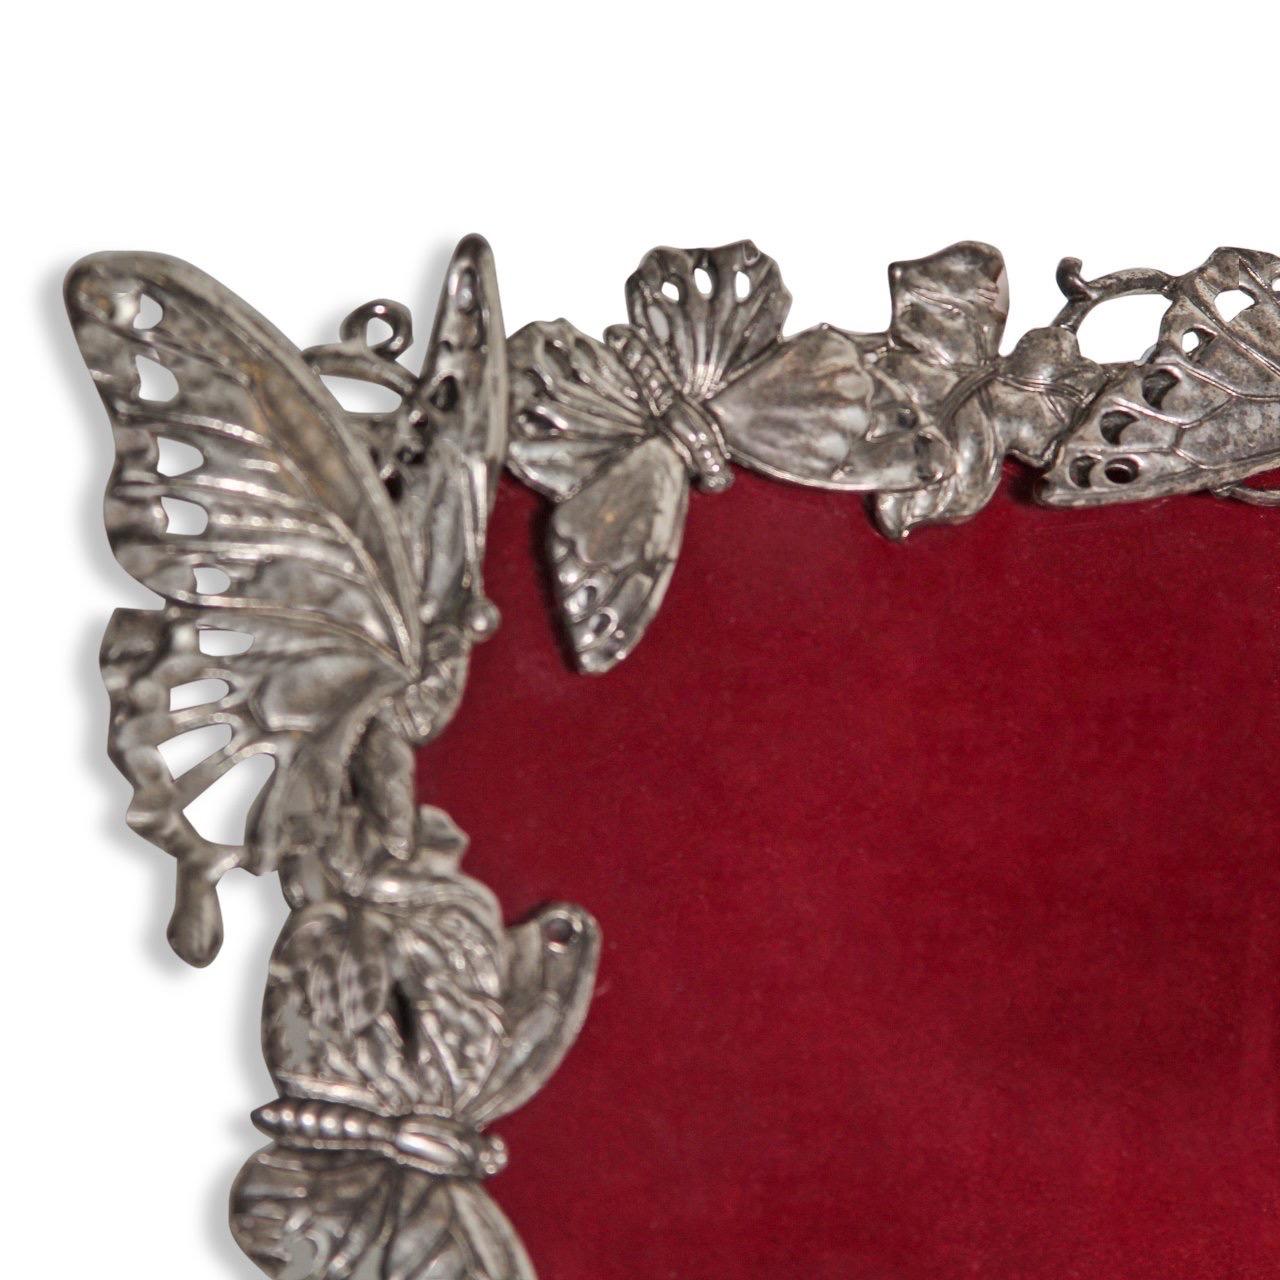 Arthur Court butterfly picture frame.

Features a cast aluminum frame decorated with butterflies and foliage. Removable back with stand. Signed with stamped mark.

Frame measures 8.5” H x 6.5” W; photo area is 5” x 7.”.